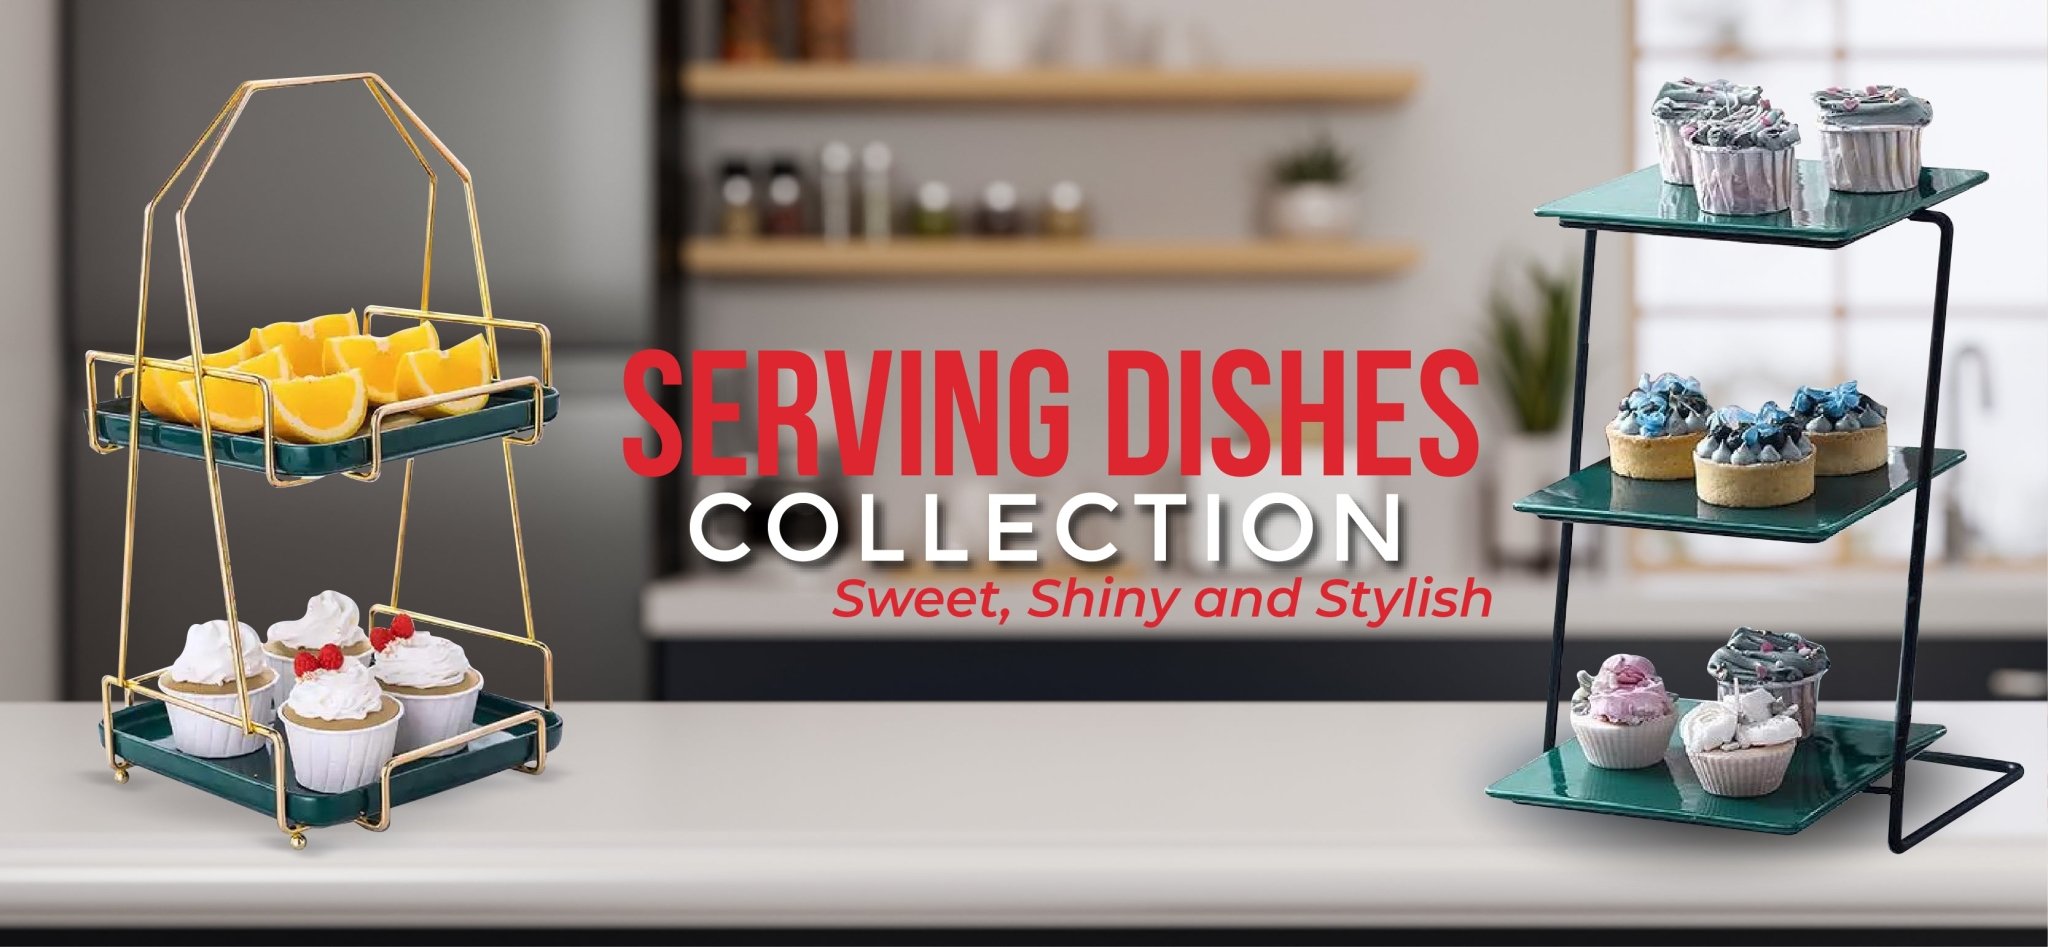 Serving Dishes, Trays & Platters - Shop for Serveware Products Online